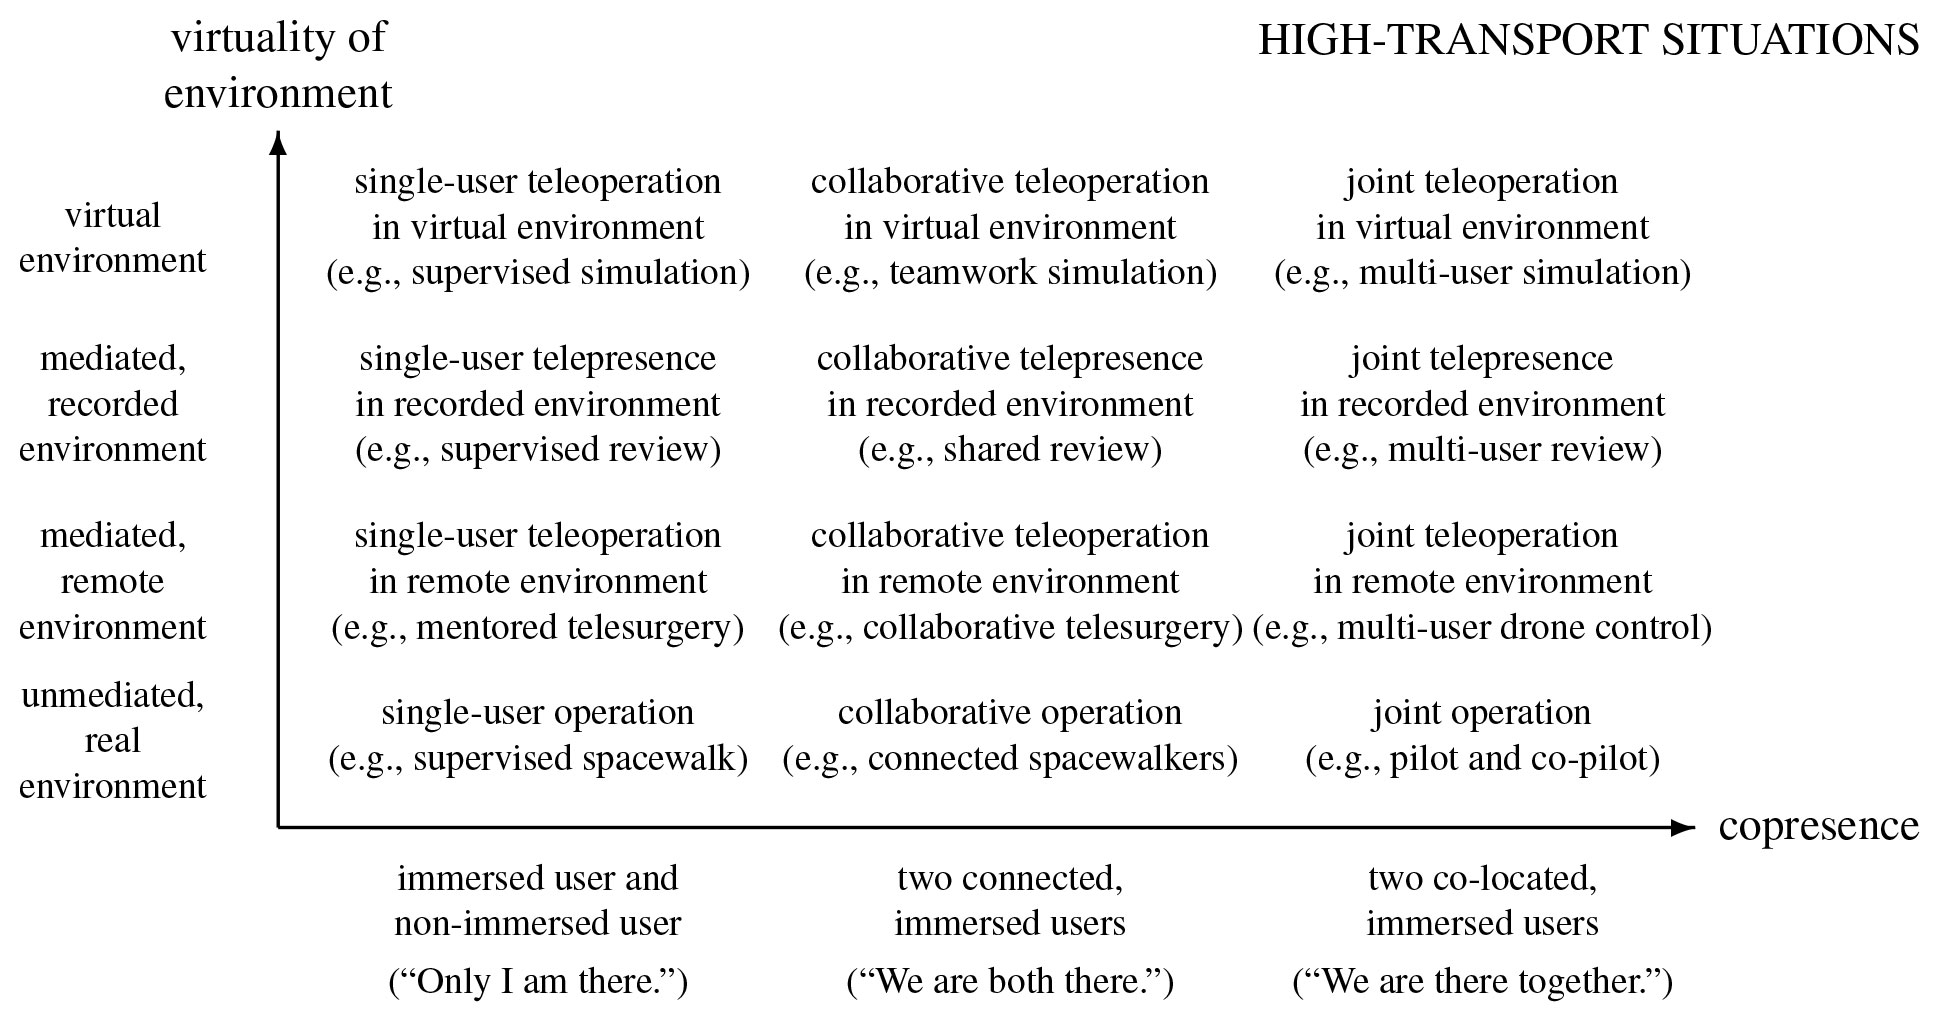 The dimensions of copresence (horizontal) and virtuality (vertical) of our classification for high-transport situations. The row labeled "unmediated, real environment" is an extension for real environments.